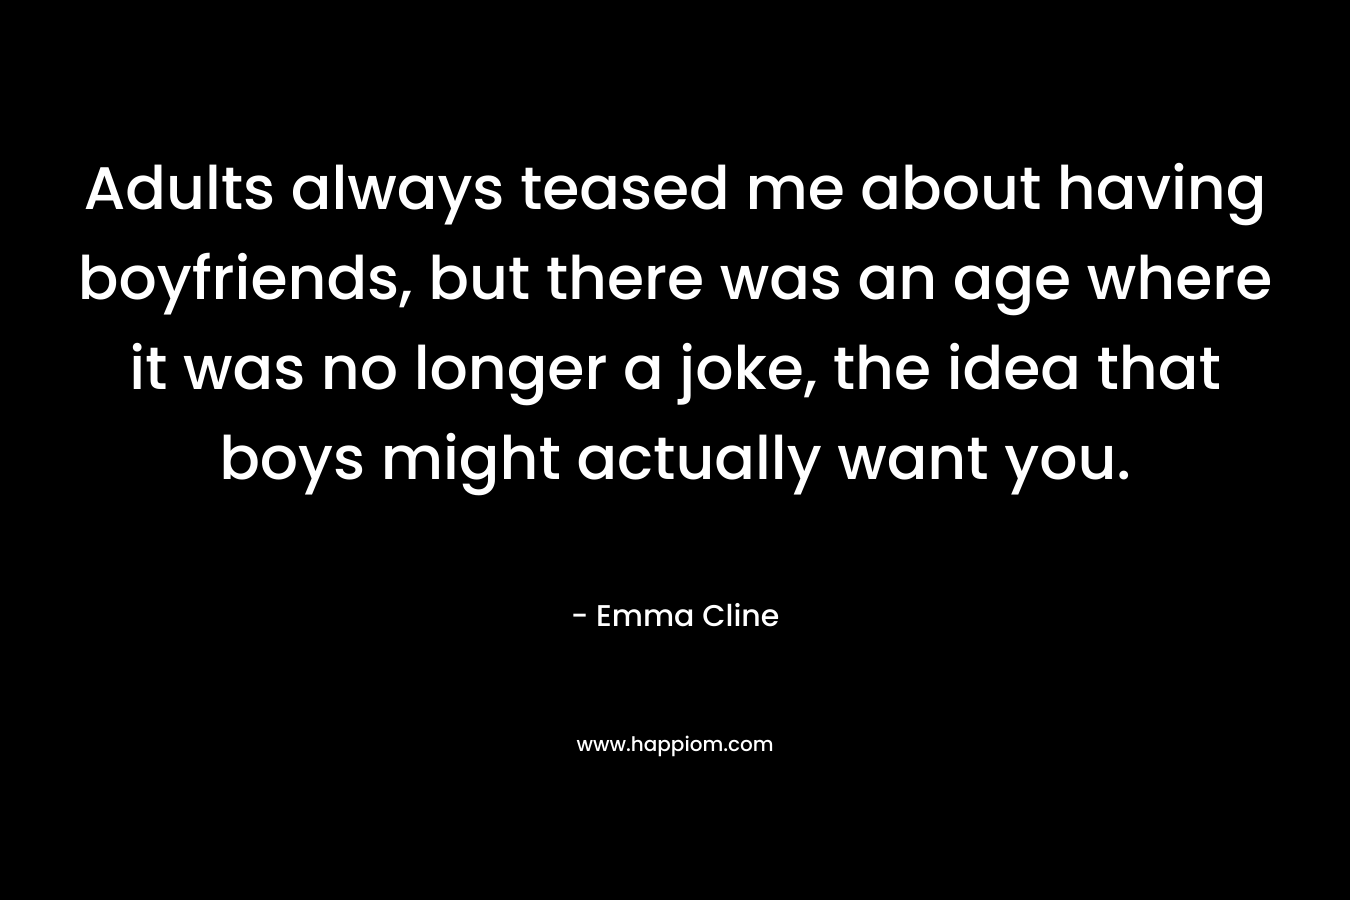 Adults always teased me about having boyfriends, but there was an age where it was no longer a joke, the idea that boys might actually want you. – Emma Cline